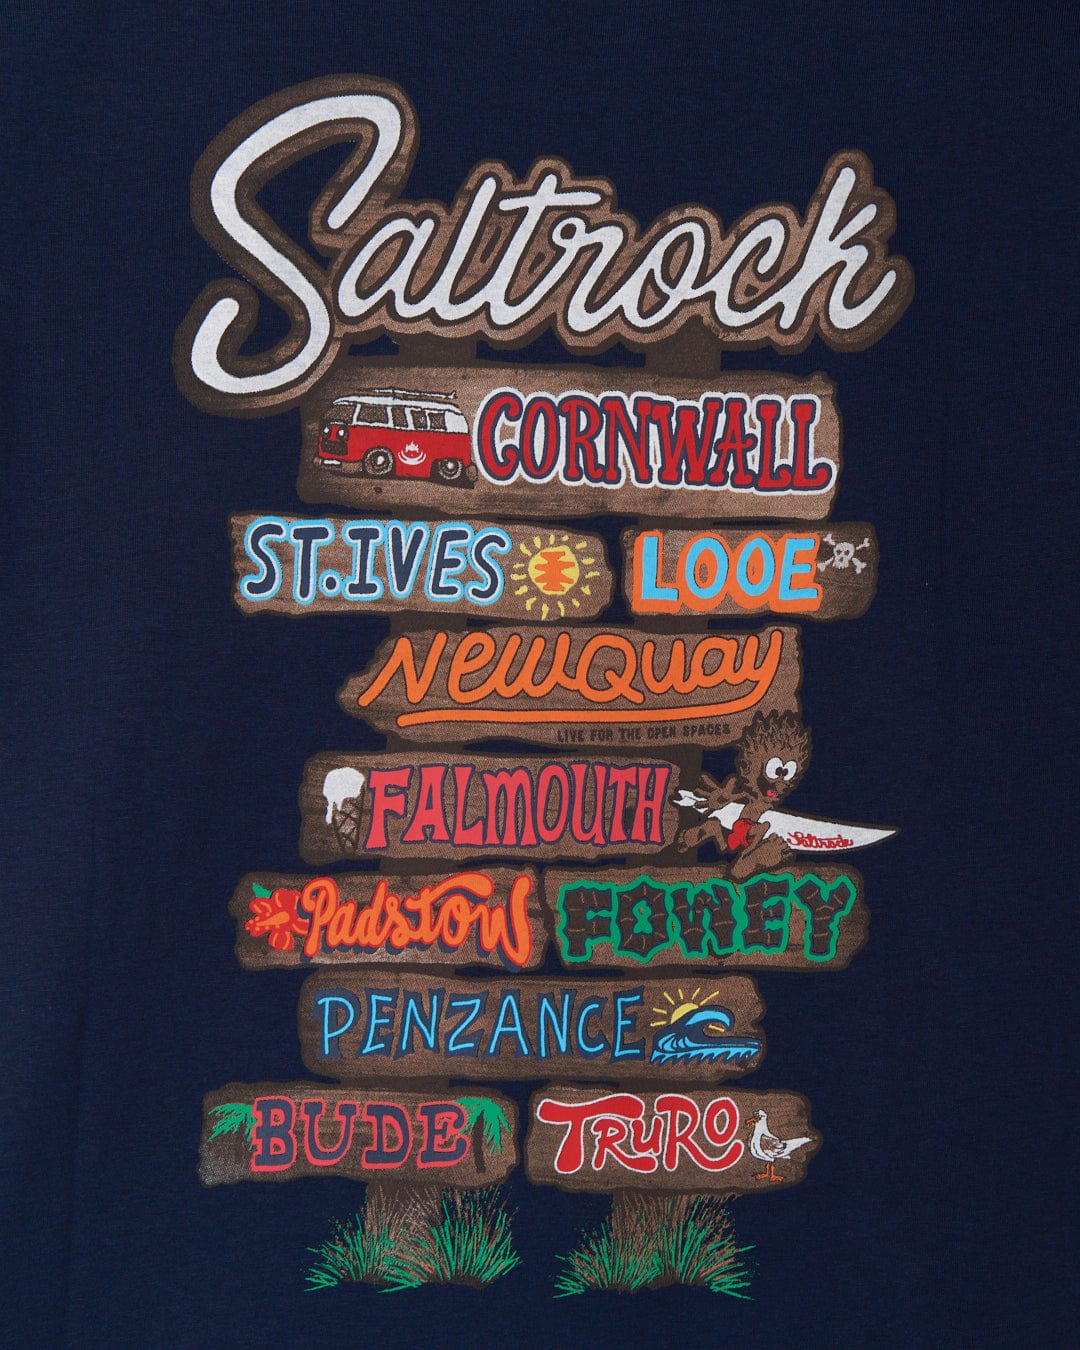 A beach Signs Cornwall t-shirt from Saltrock, featuring peached soft hand feel.